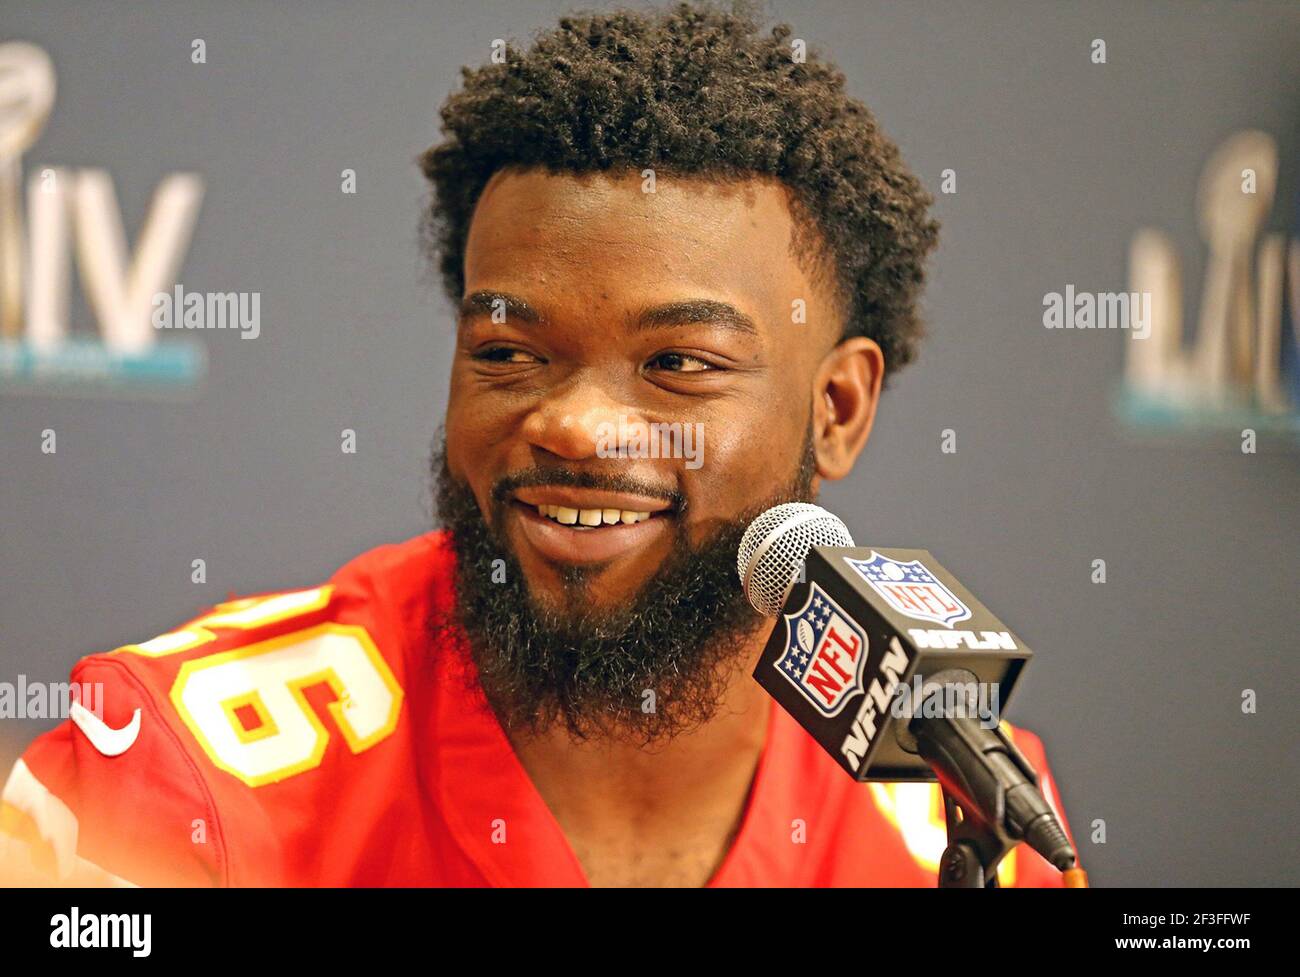 Aventura, USA. 28th Jan, 2020. Kansas City Chiefs running back Damien Williams during a news conference as the Chiefs prepare to play the San Francisco 49ers in Super Bowl LIV, on January 28, 2020, in Aventura, Florida. Williams has decided to opt-out of the 2020 NFL season. (Photo by Charles Trainor Jr./Miami Herald/TNS/Sipa USA) Credit: Sipa USA/Alamy Live News Stock Photo